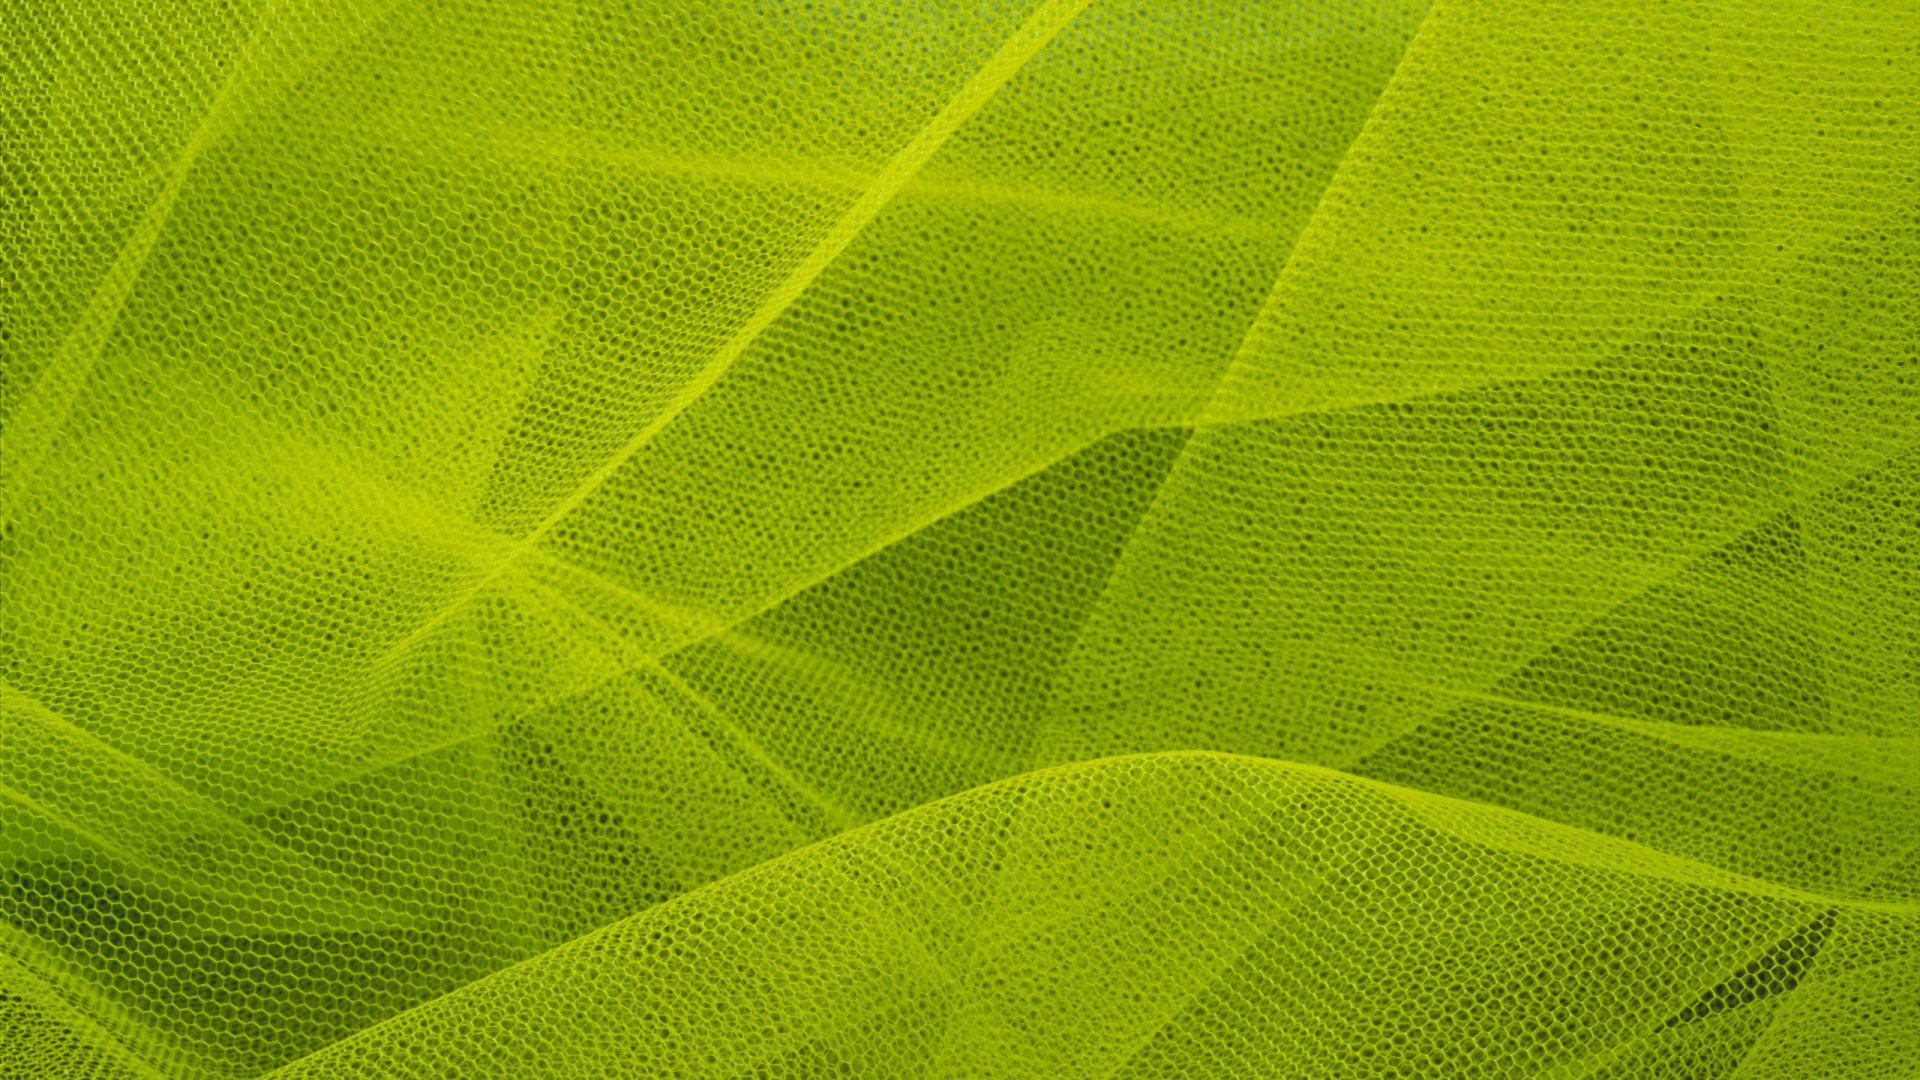 Green and White Polka Dot Textile. Wallpaper in 1920x1080 Resolution